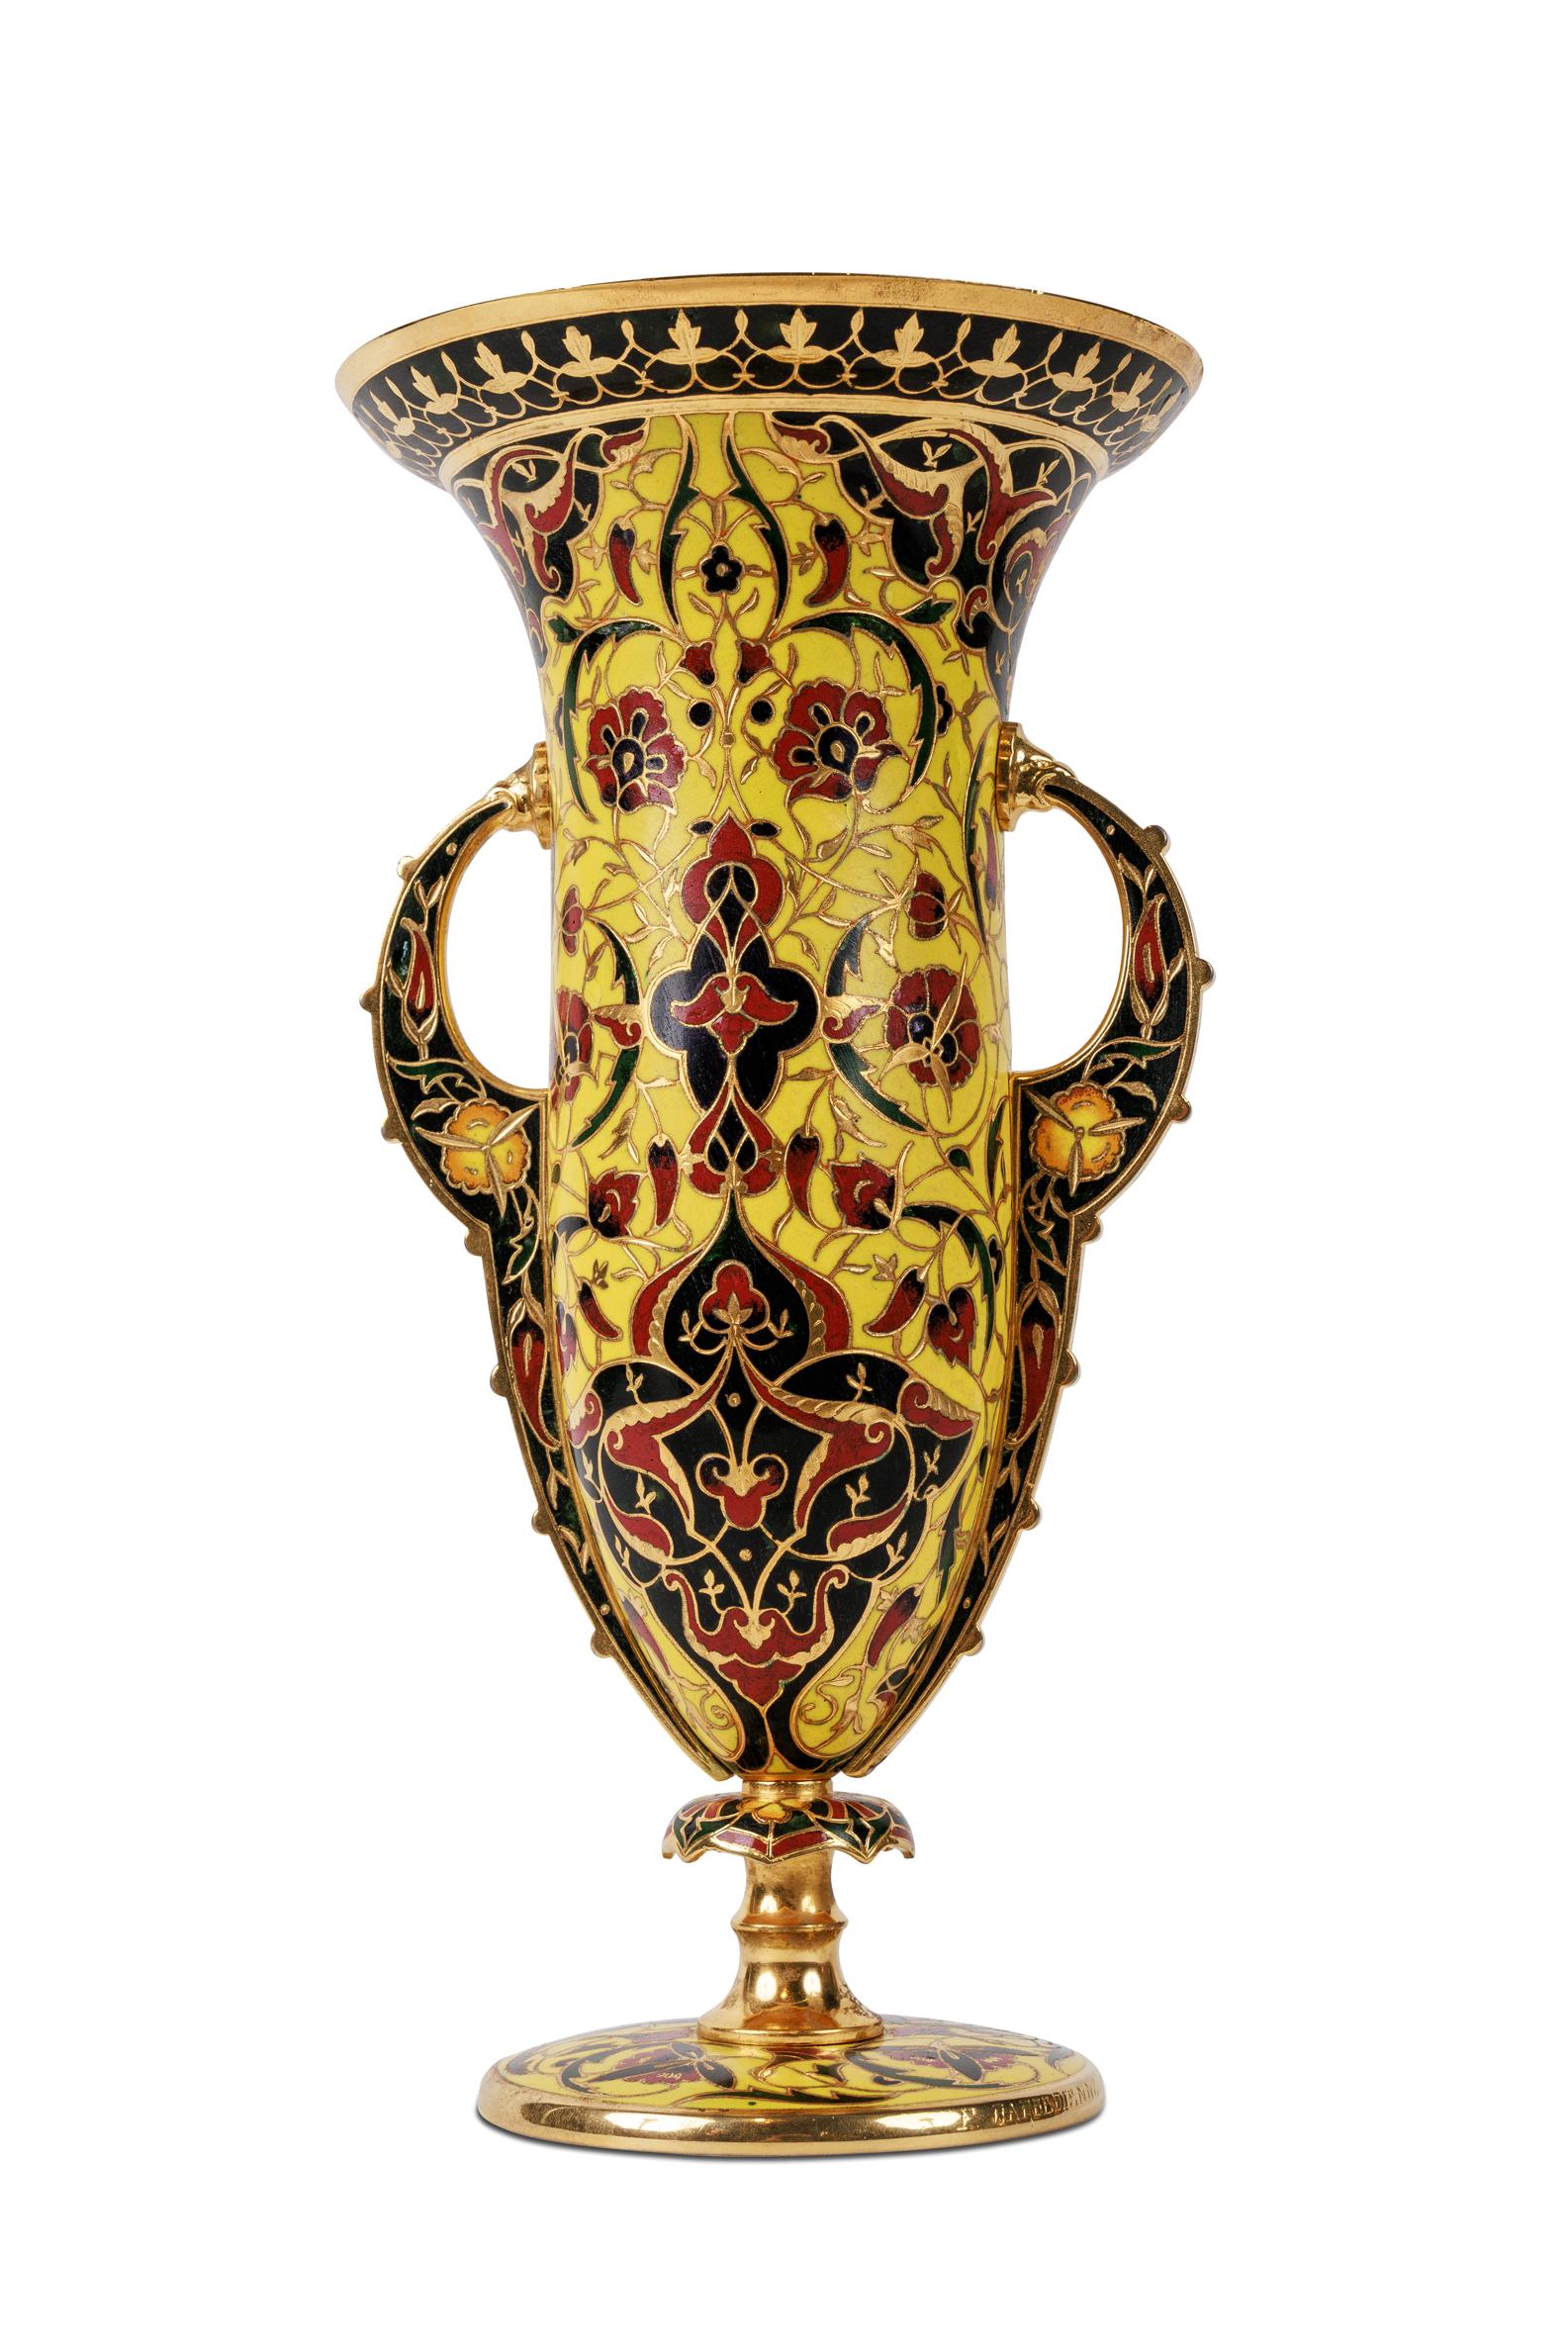 19th Century Ferdinand Barbedienne, A French Ormolu and Champleve Enamel Vase, C. 1870 For Sale